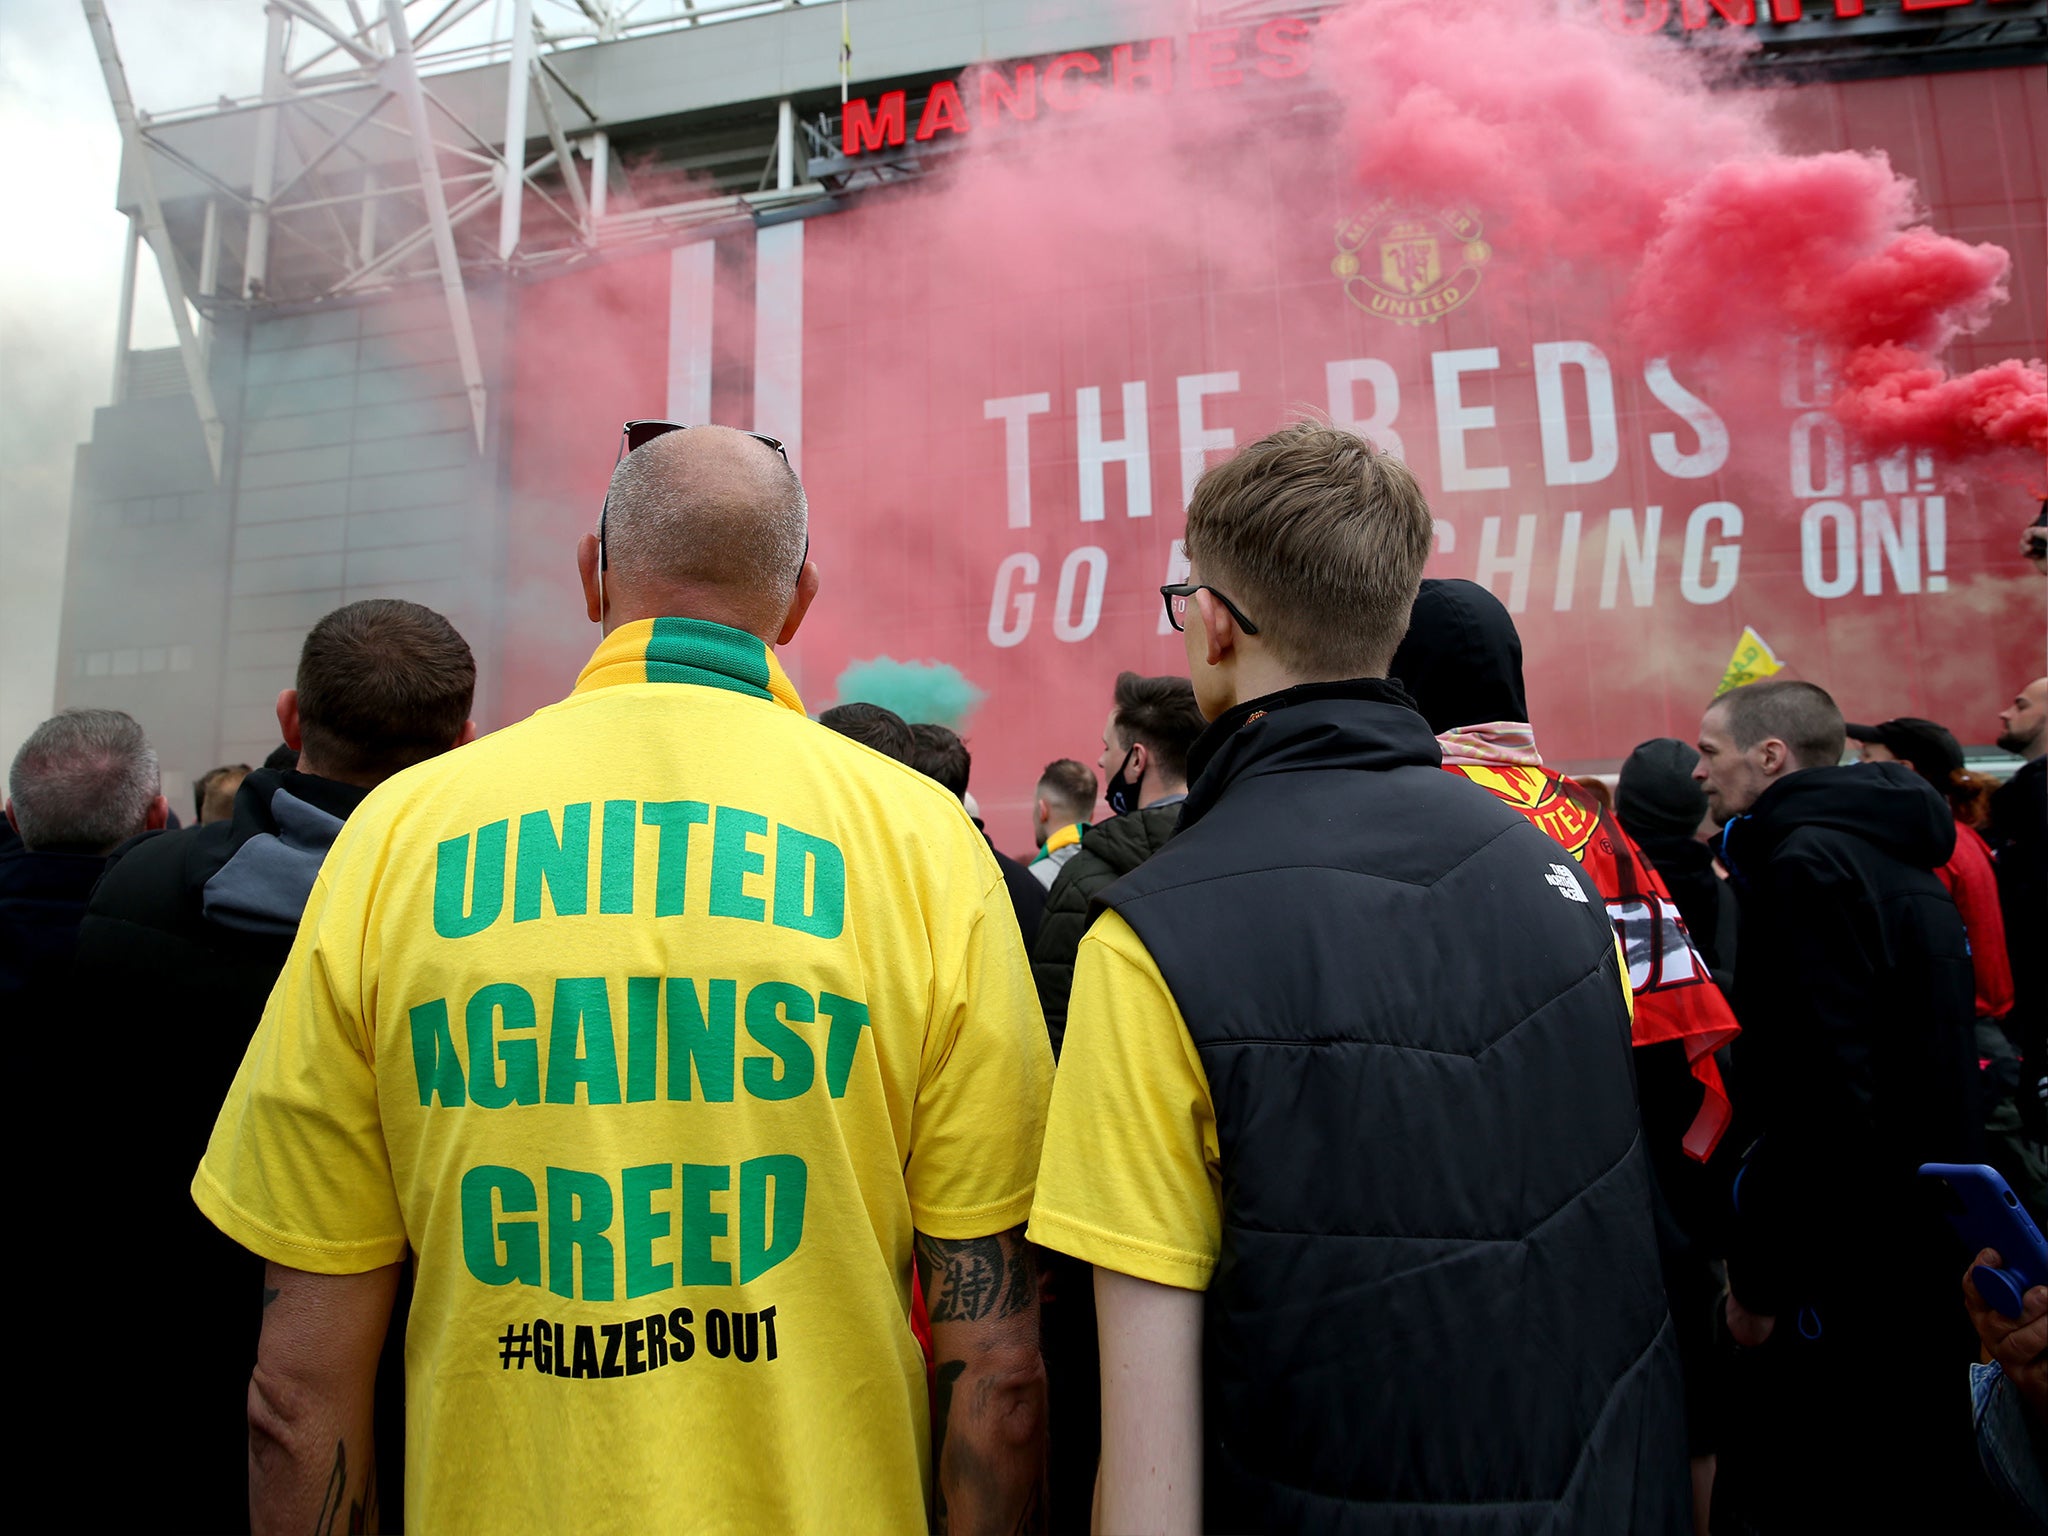 Fans gather outside Old Trafford earlier this month to protest against the Glazer family, the owners of Manchester United, before their Premier League match against Liverpool. The fixture was subsequently postponed